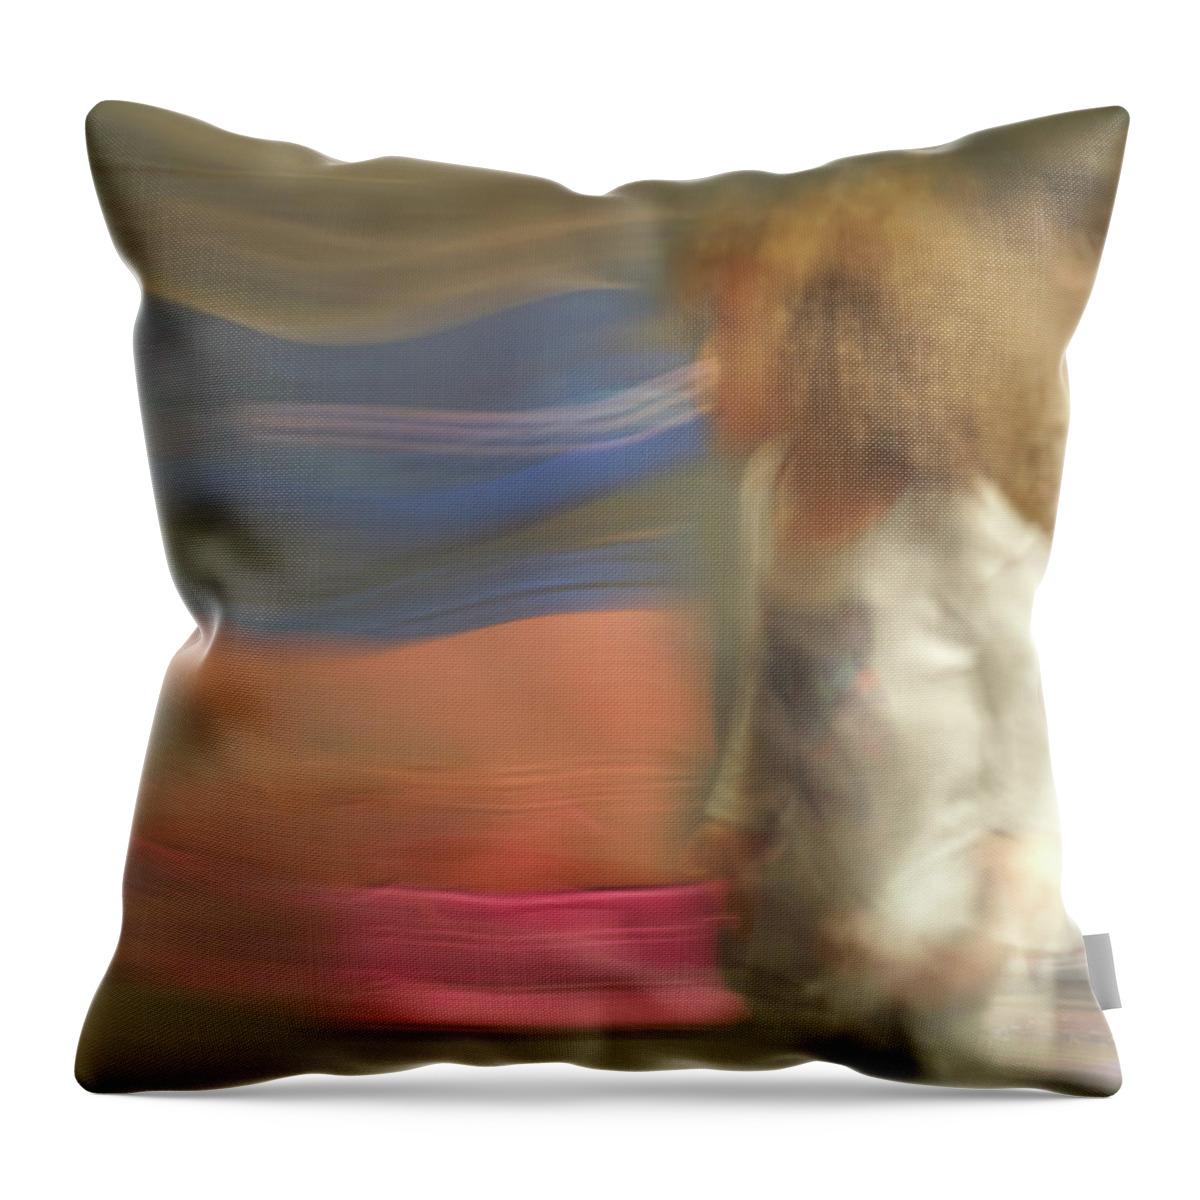 Dance Throw Pillow featuring the photograph The Dance #3 by Raymond Magnani